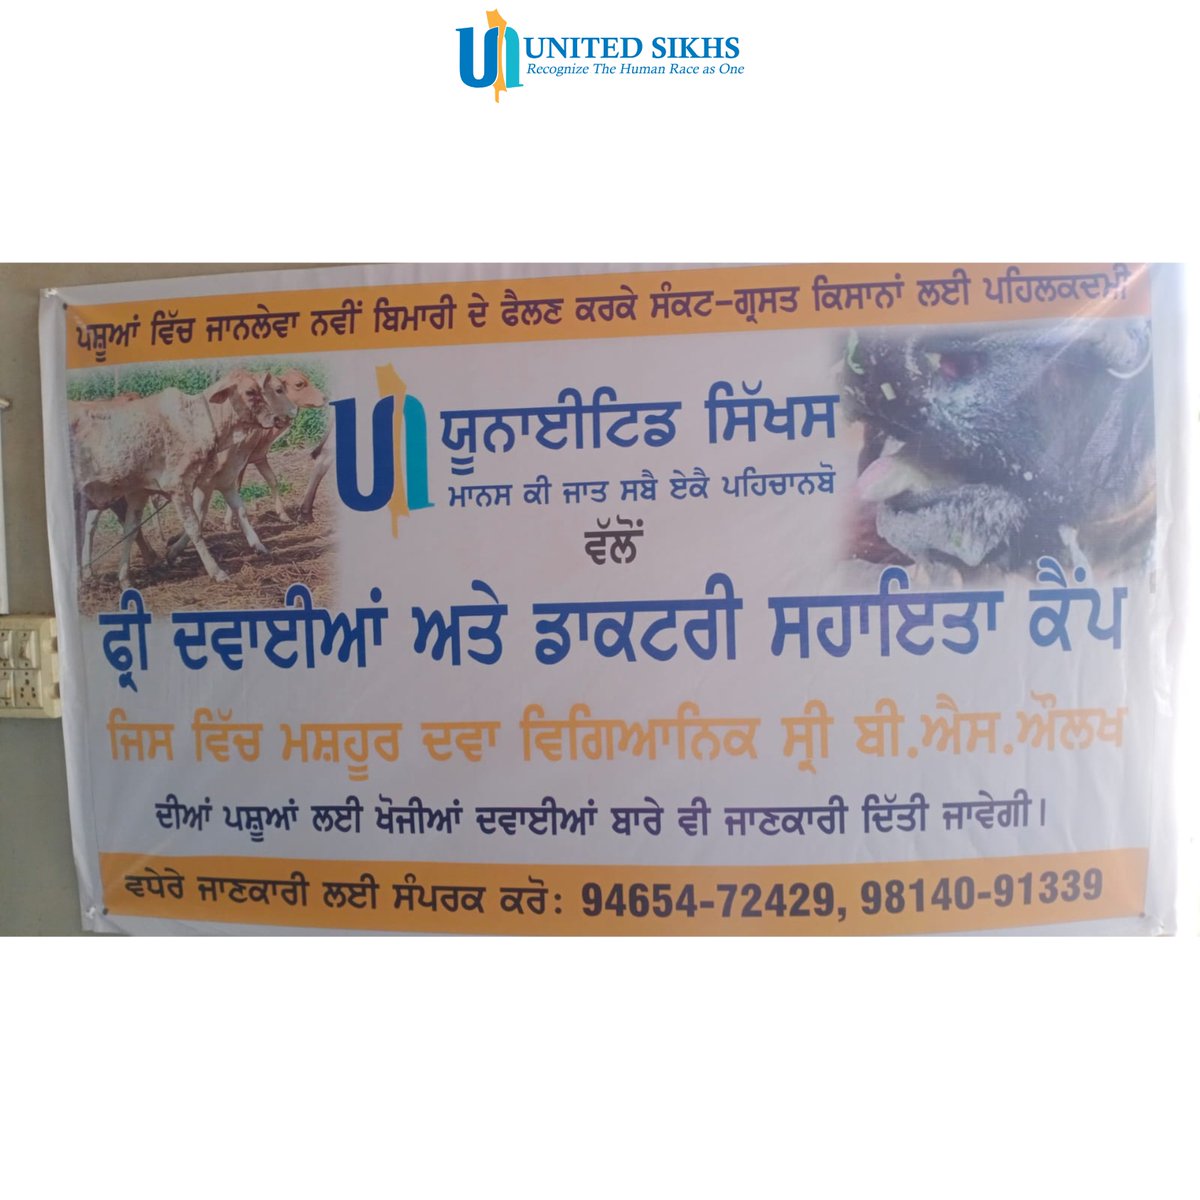 URGENT Update on Foot and Mouth Disease Outbreak in Panjab: The situation escalates as the disease spreads across more districts, impacting livestock and farmers' livelihoods. UNITED SIKHS is on the ground providing vital care and medicines. Your support is crucial to combat…